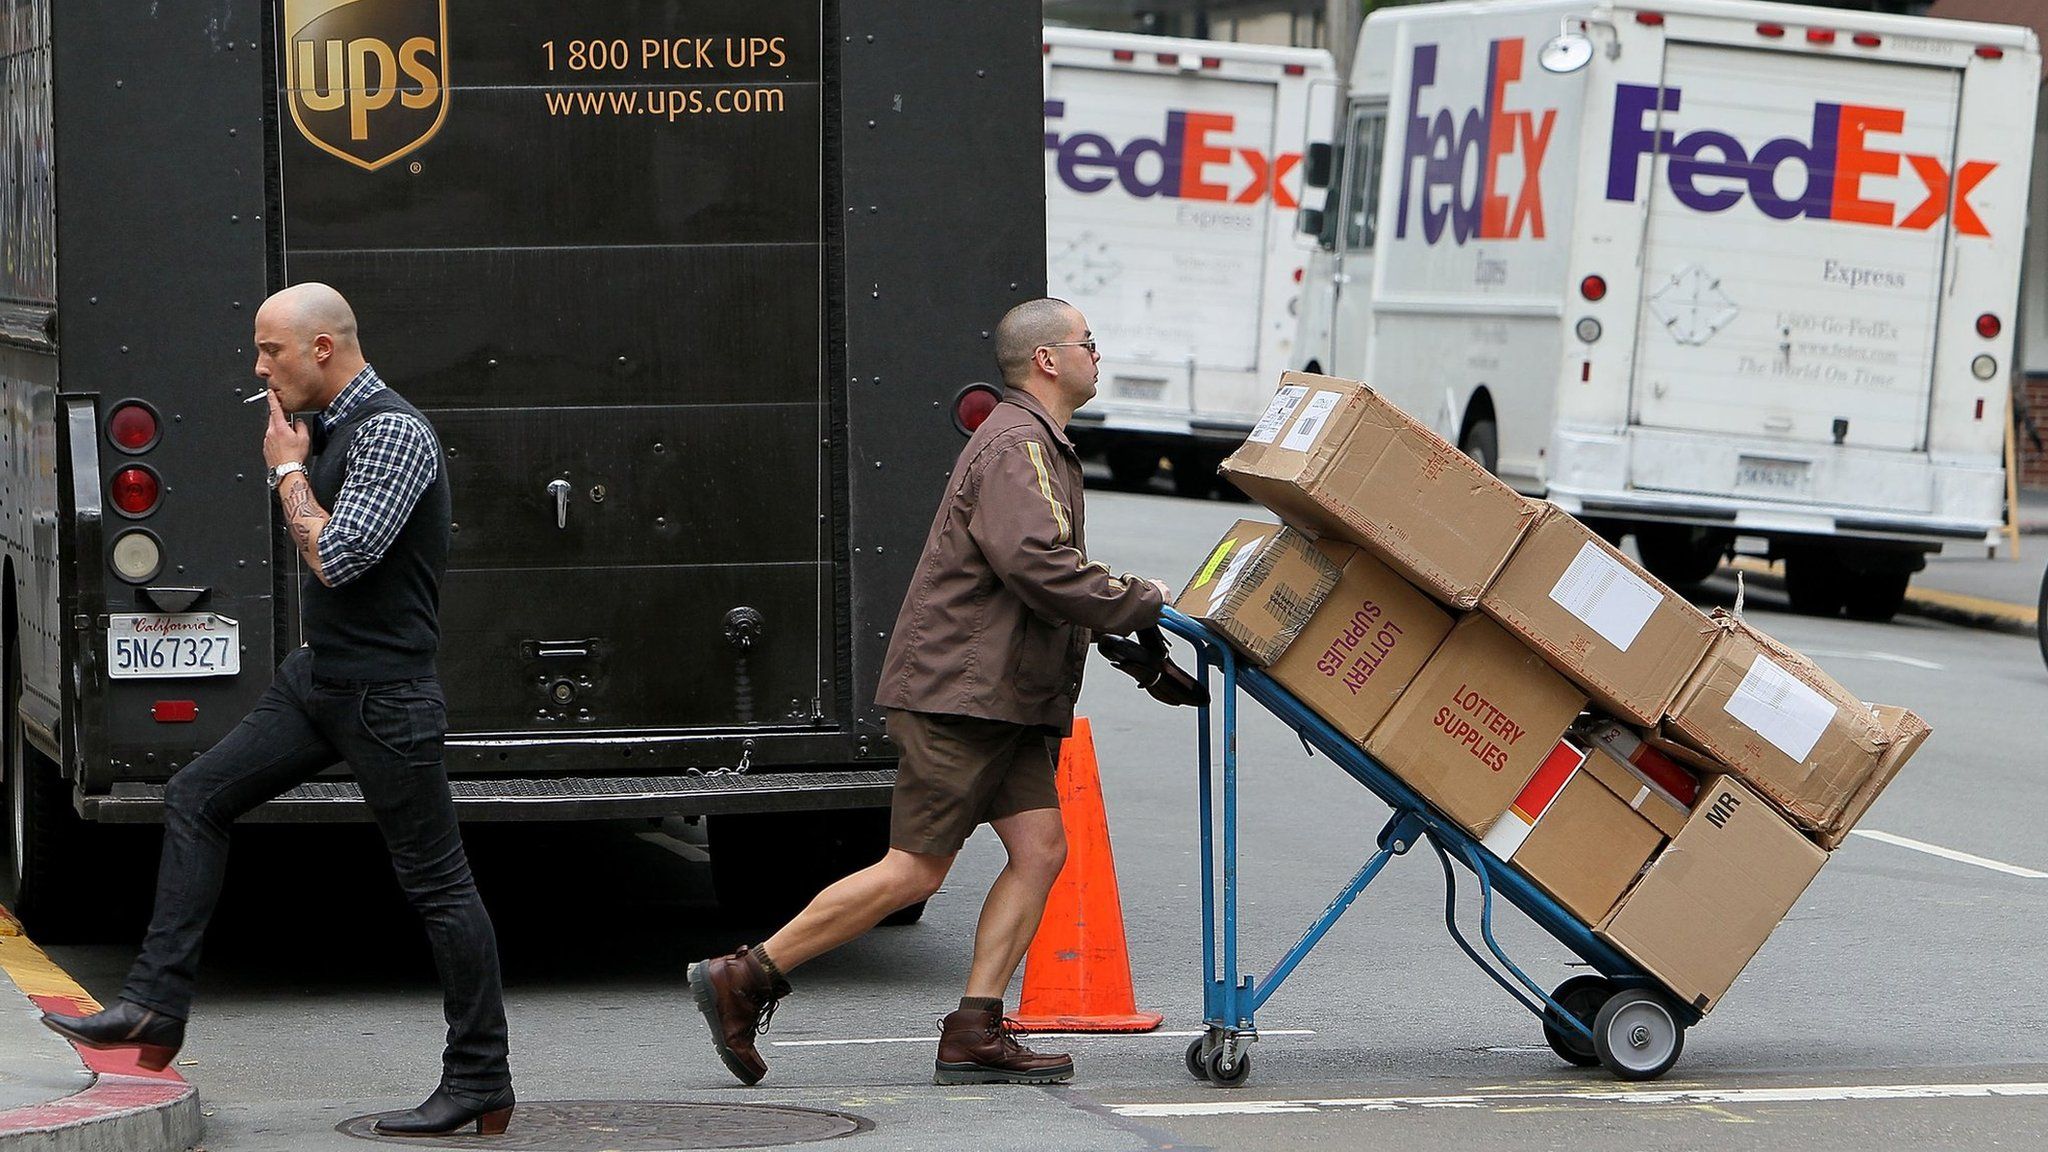 United Parcel Service (UPS) driver Grant Jung (R) pushes a handtruck loaded with boxes as he makes deliveries in San Francisco,